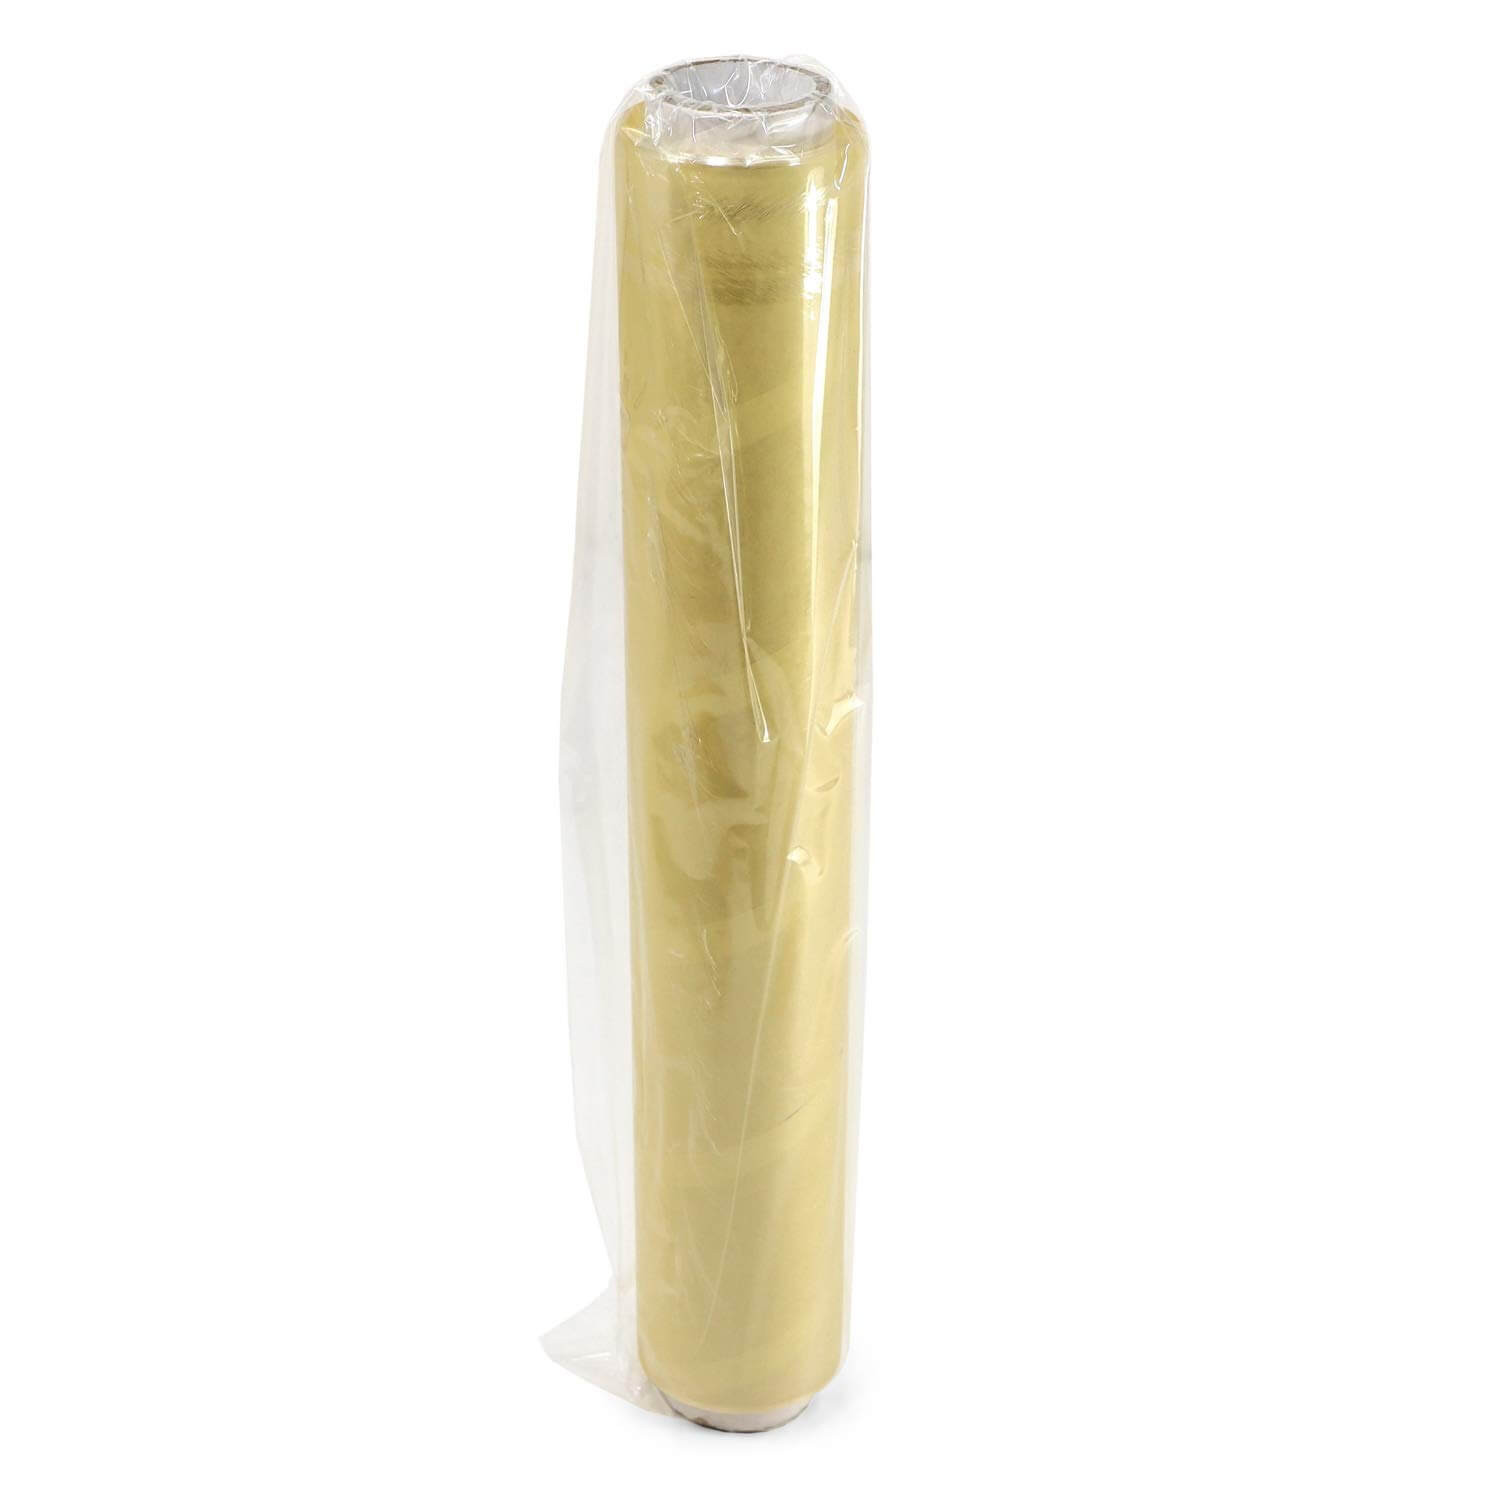 12 Strong PVC Cling Food Film Wrap Refill Roll, Champagne Color